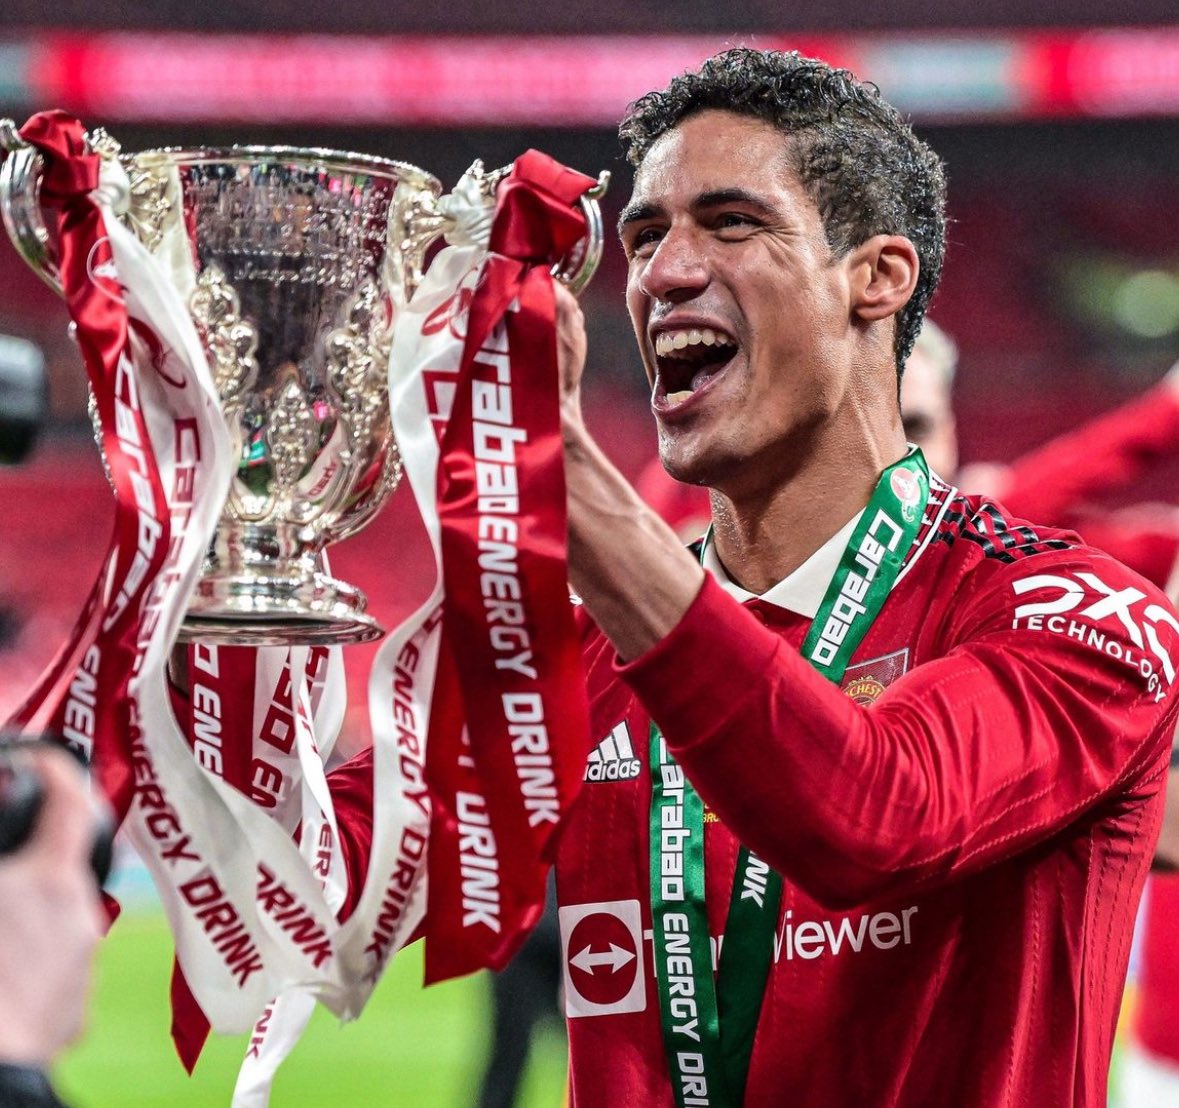 🔴👋🏻 Raphael Varane to Man United fans: “I’ll see you all at Old Trafford to say goodbye for the last game at home this season”. “It’s going to be a very emotional day for me”.